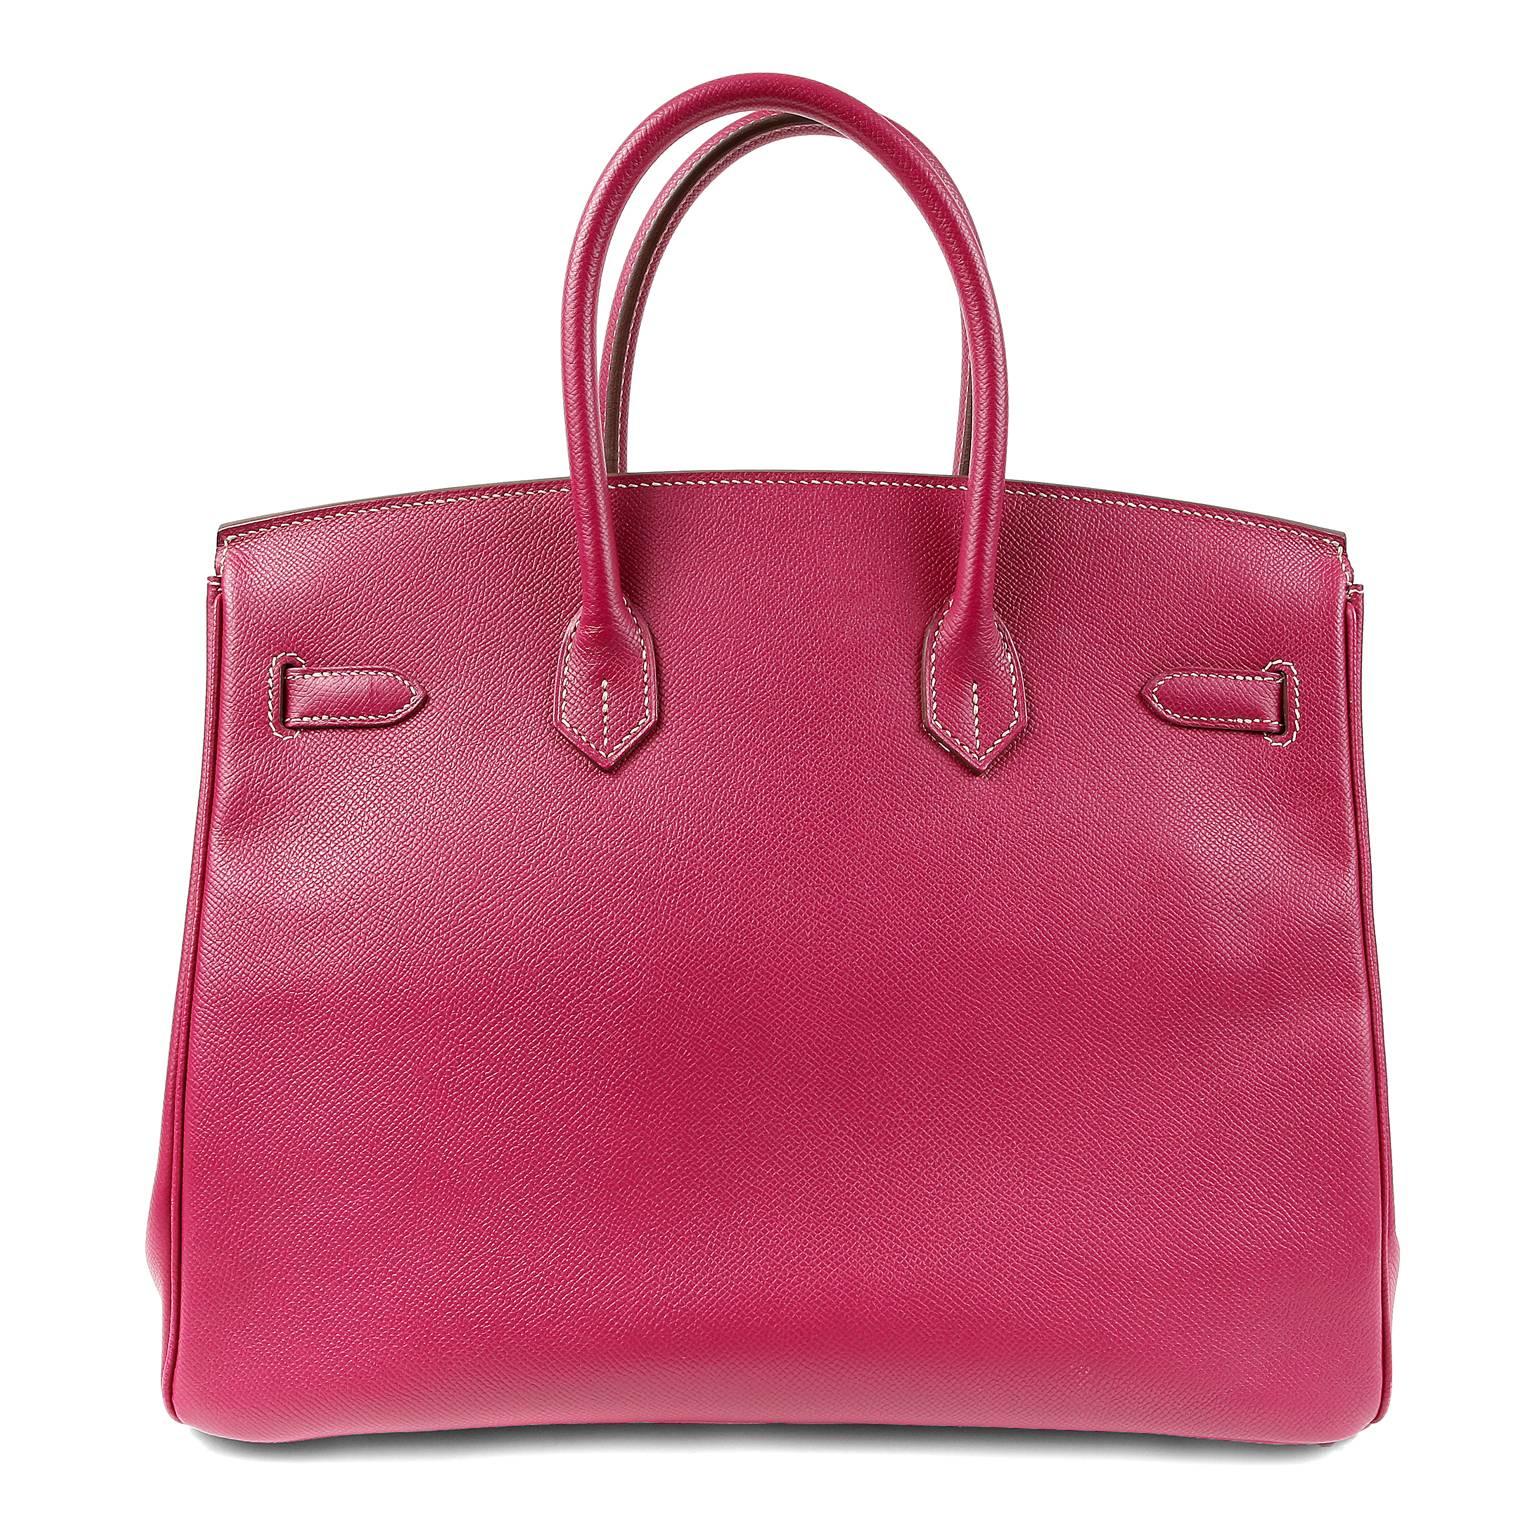 Hermès Raspberry Epsom 35 cm Birkin- EXCELLENT PLUS Condition  Hermès bags are considered the ultimate luxury item the world over.  Hand stitched by skilled craftsmen, wait lists of a year or more are commonplace.  This particular Birkin is in